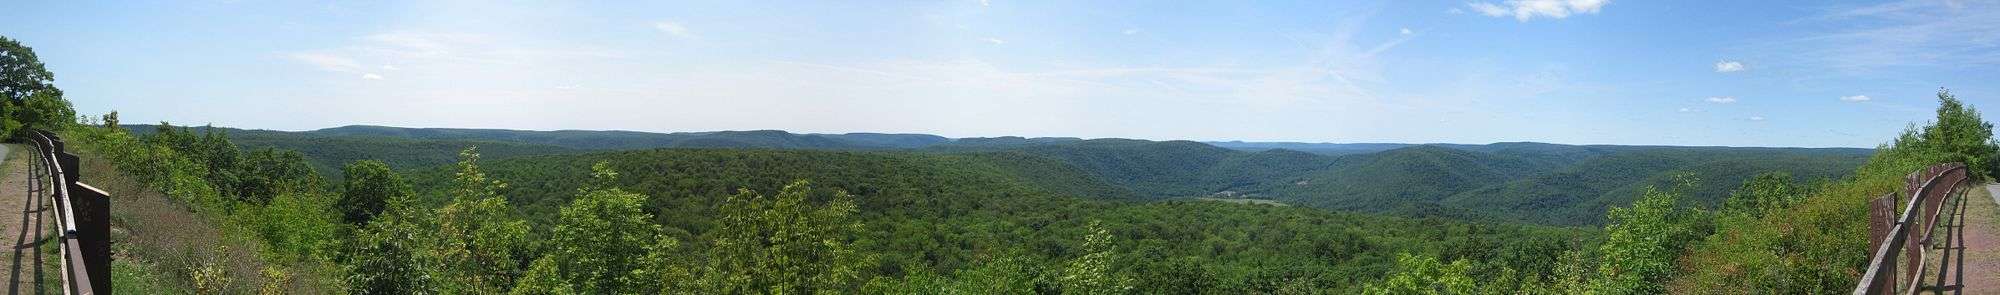 View from a fenced overlook of wooded low mountains whose peaks are all nearly the same height